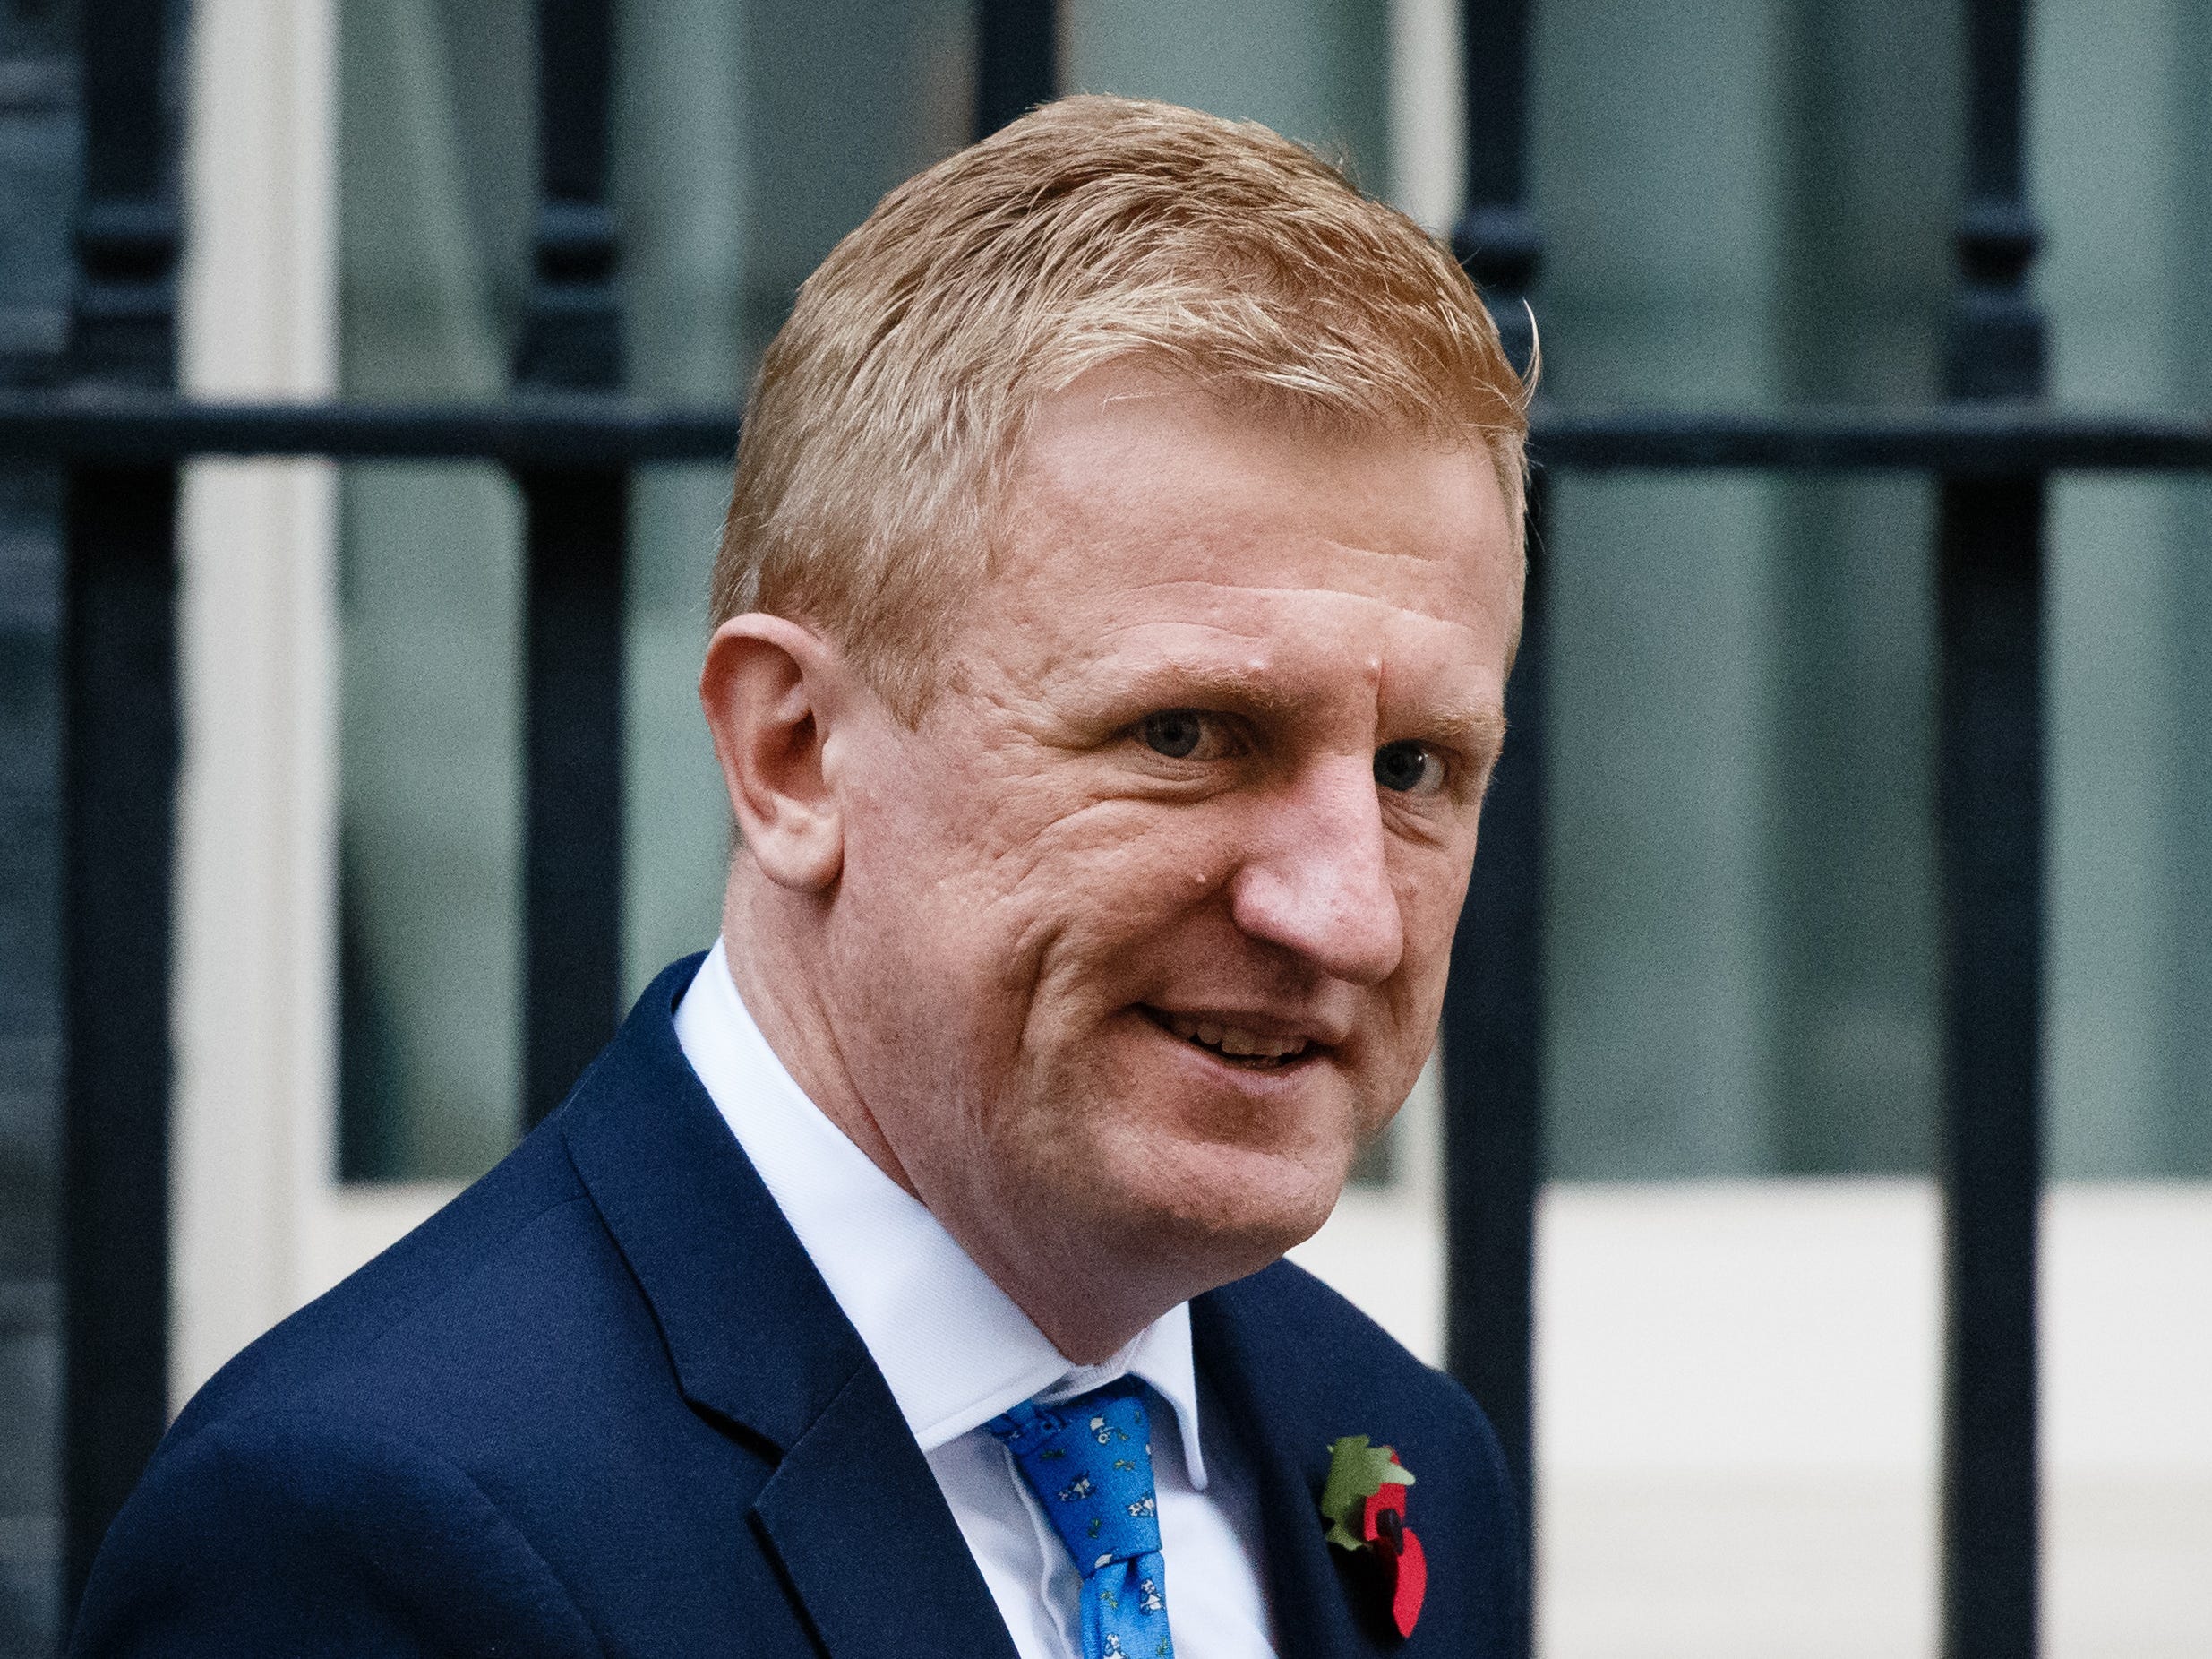 Secretary of State for Digital, Culture, Media and Sport Oliver Dowden, Conservative Party MP for Hertsmere, leaves 10 Downing Street in London.